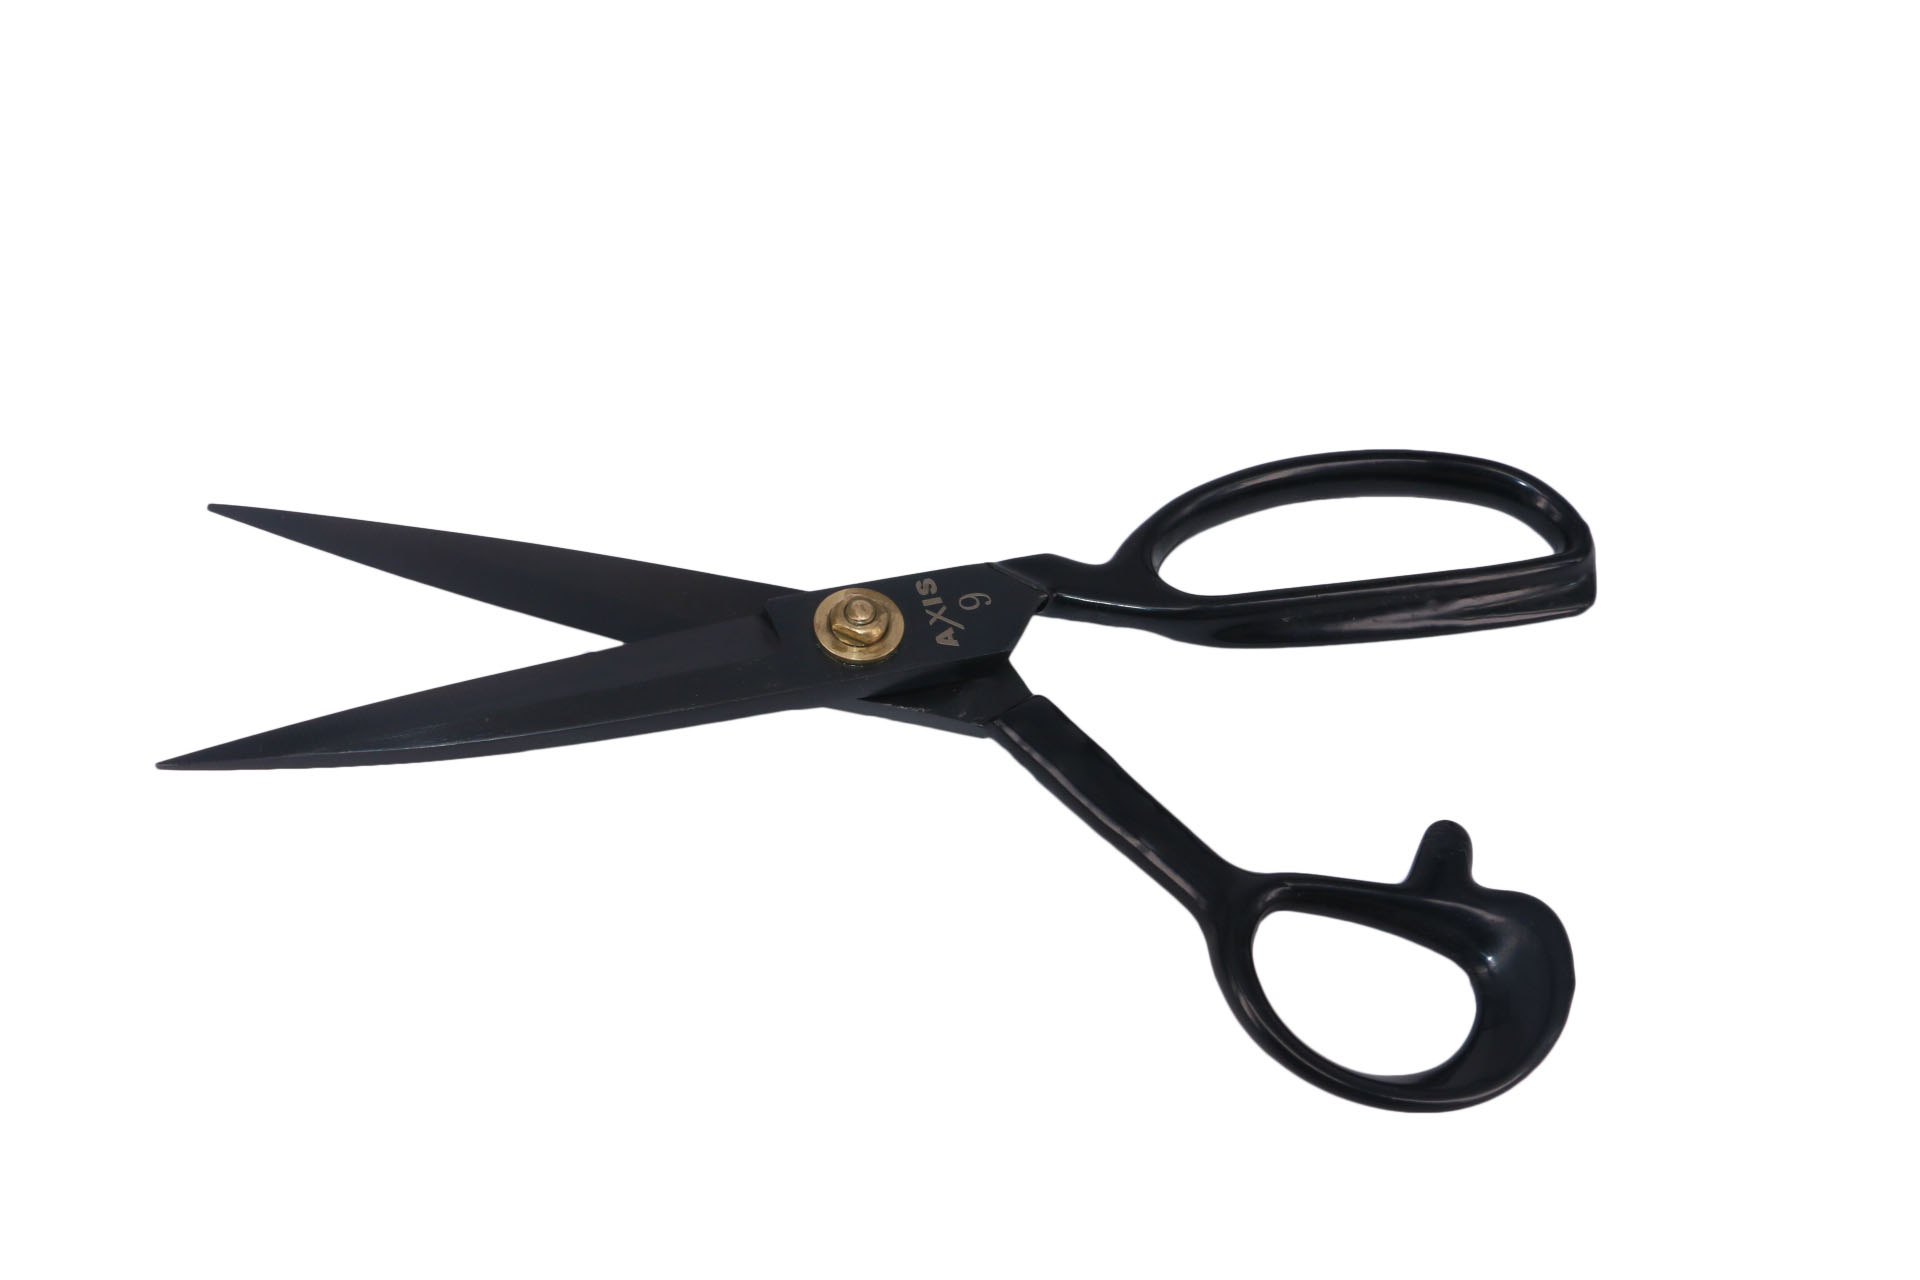 Sewing Scissors Professional 9 inch Heavy Duty Fabric Shears for Tailoring Leather Cloth Black Industrial Strength High Carbon Steel Tailor Shears